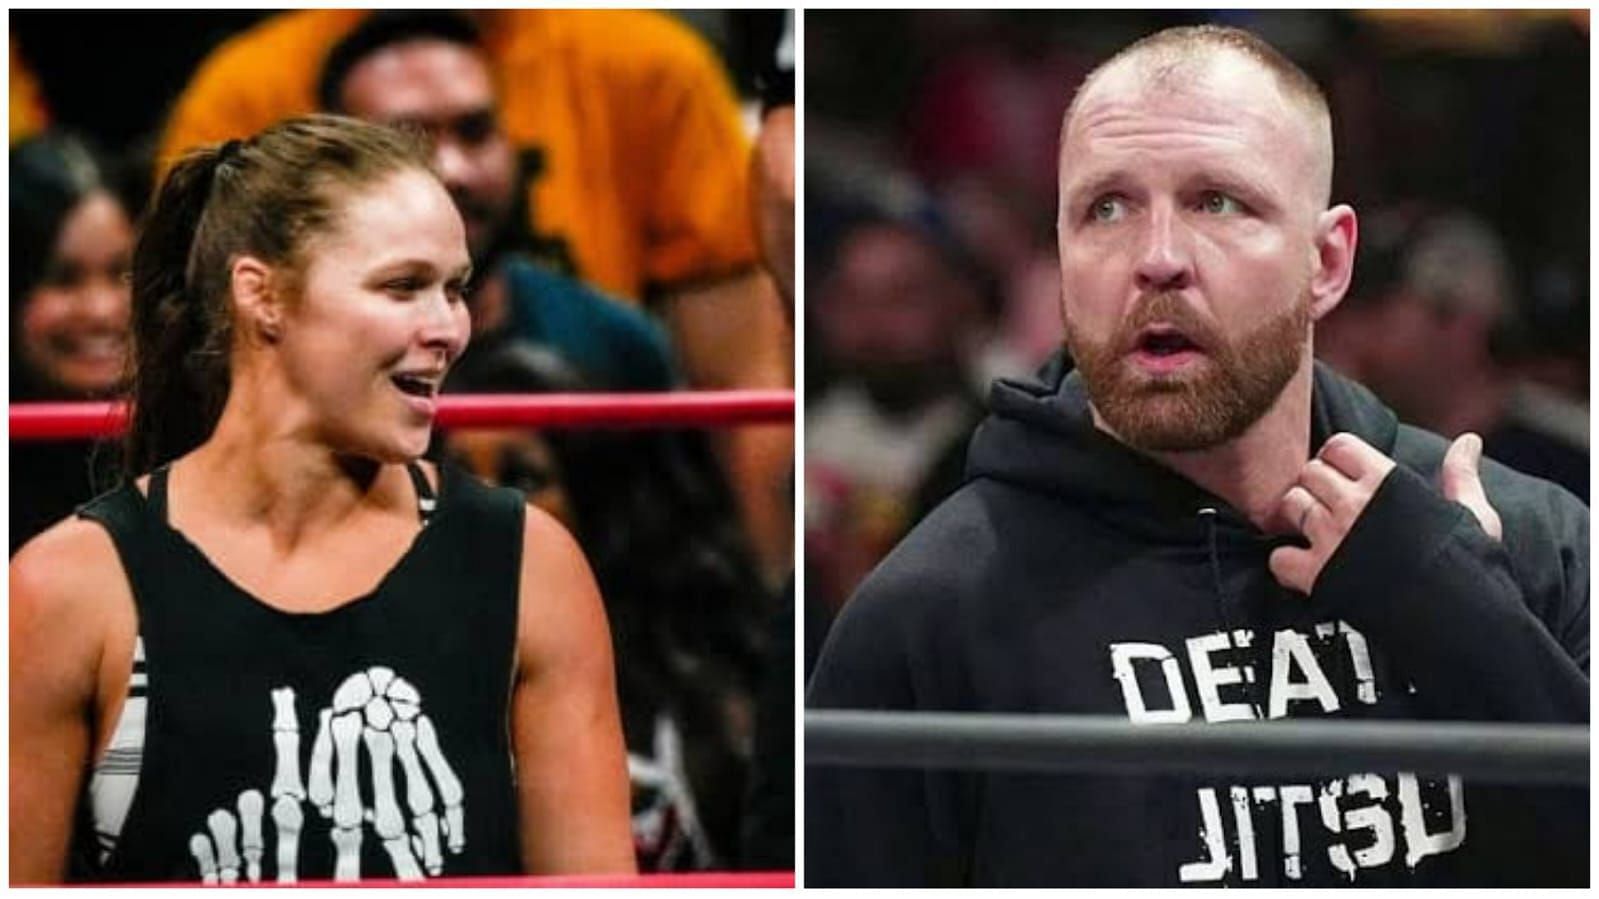 Jon Moxley played a major role in Ronda Rousey